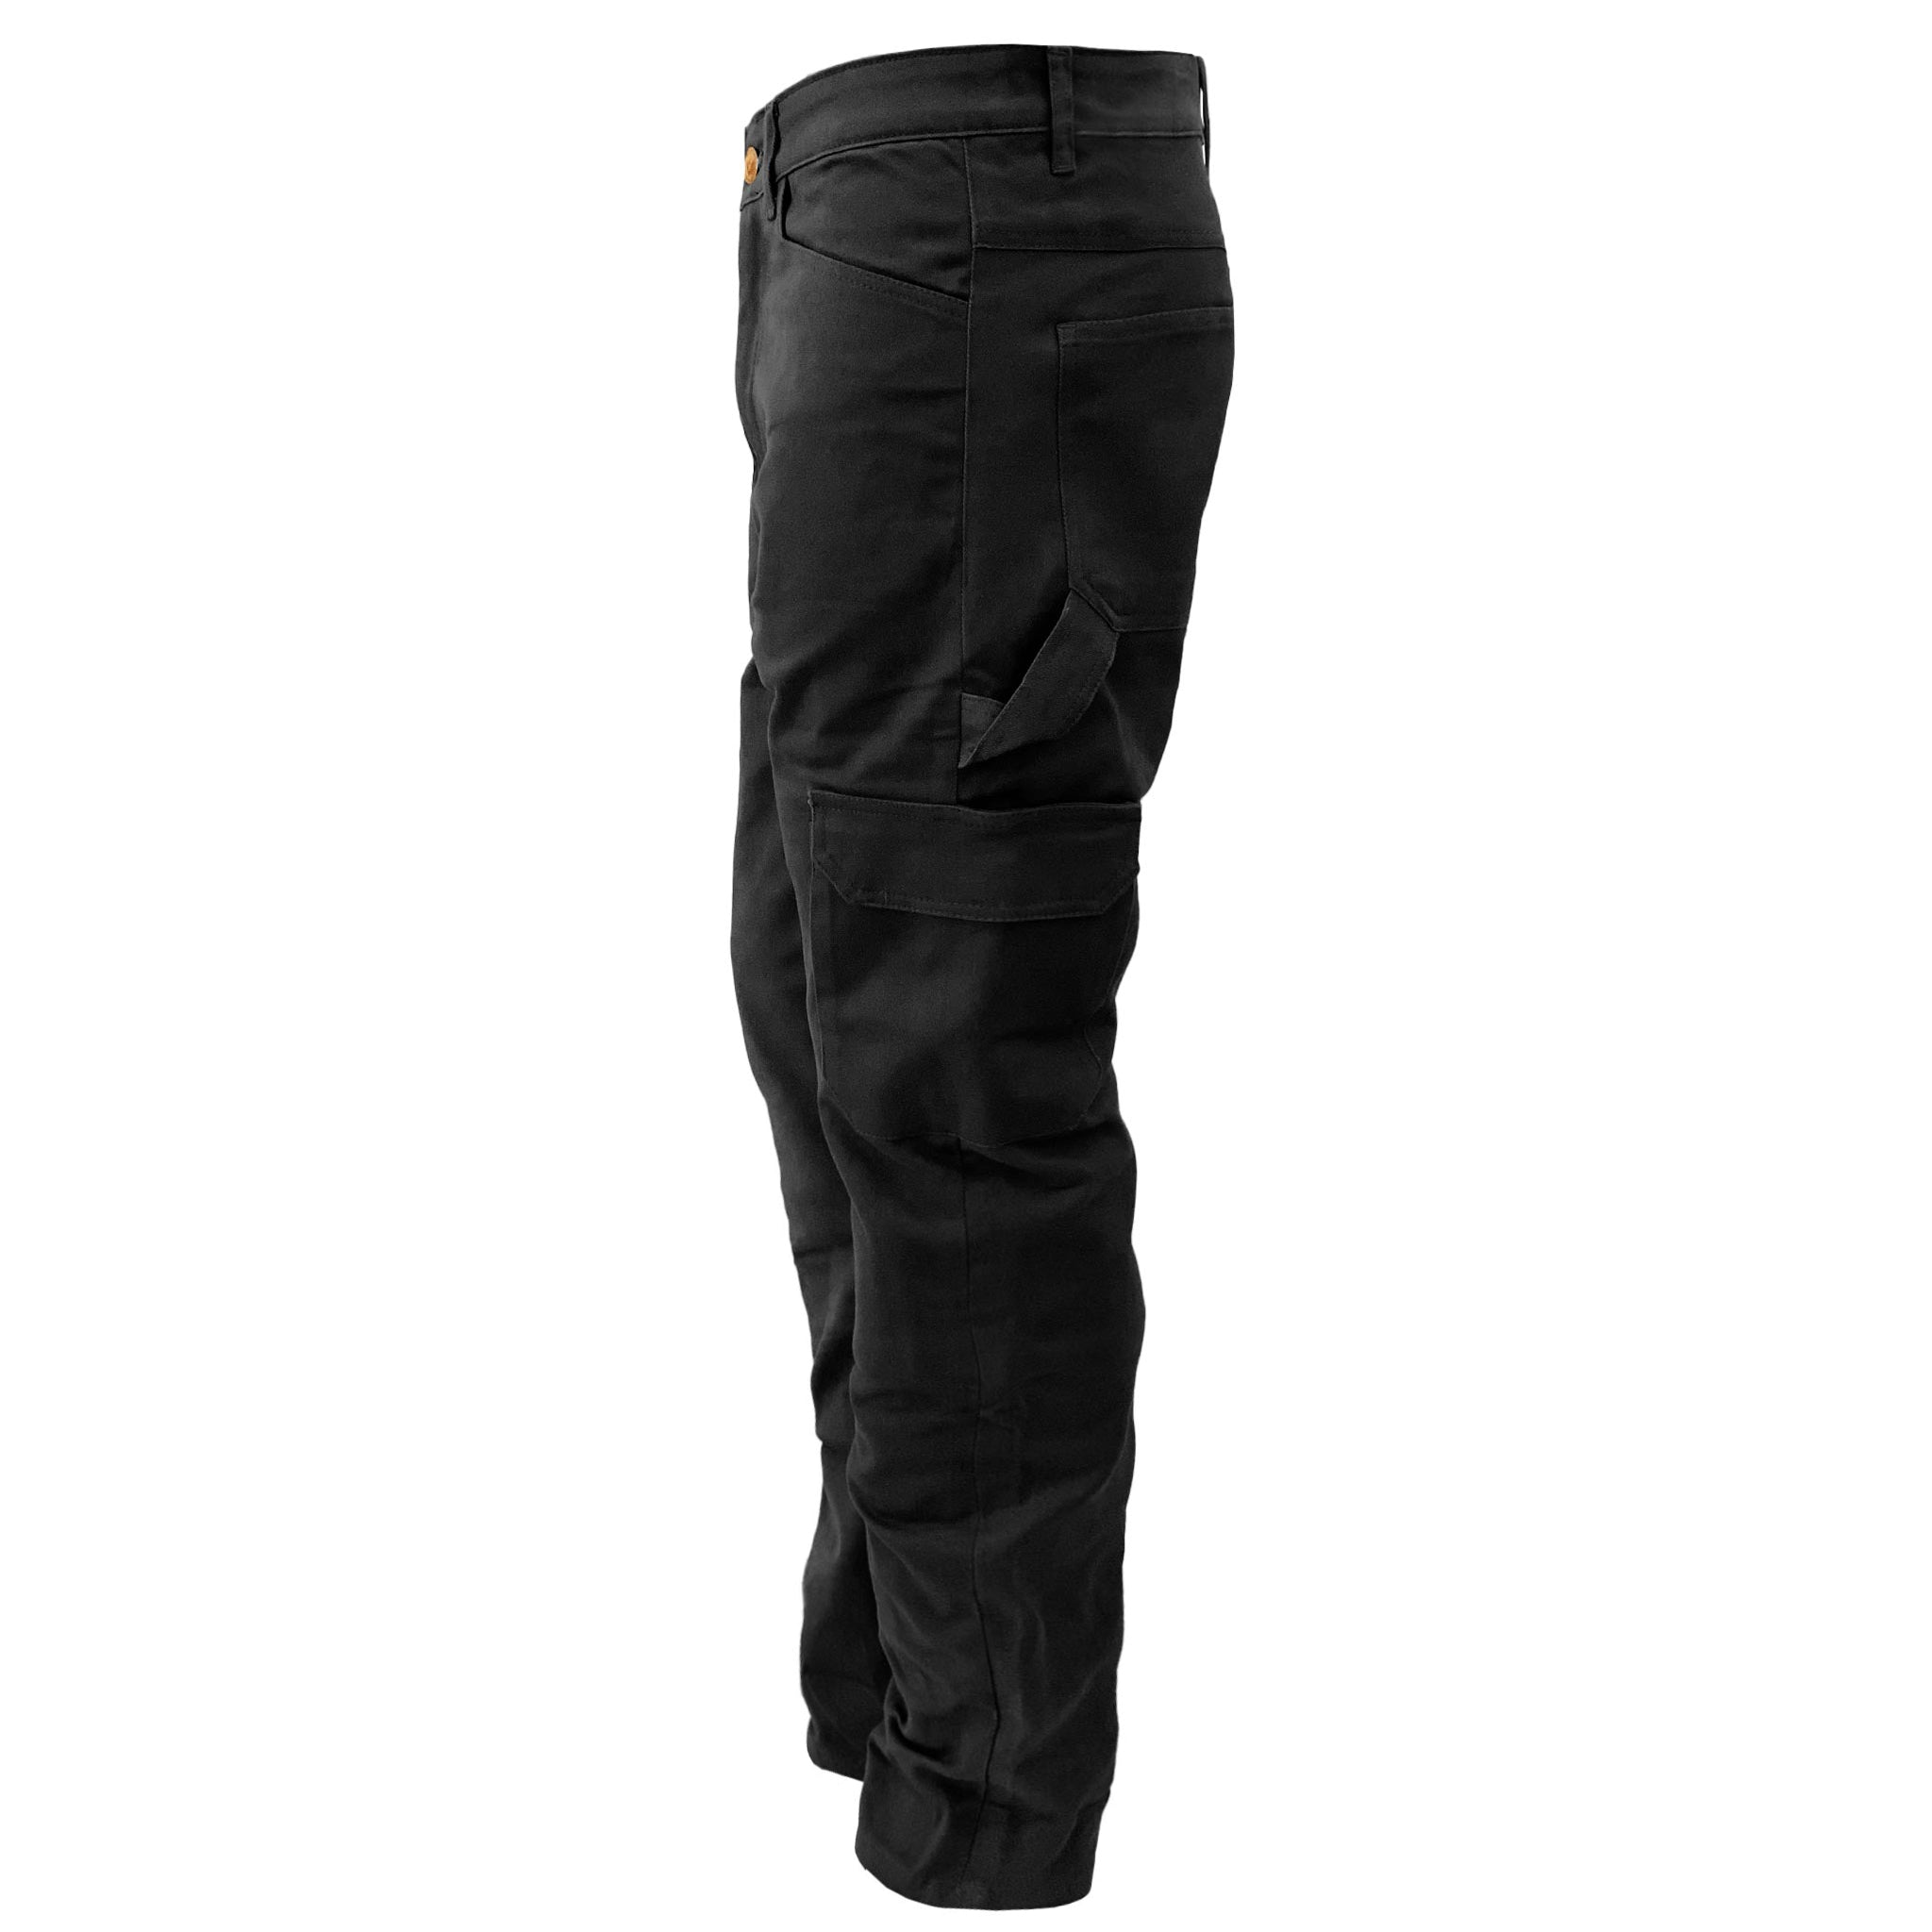 SALE Loose Fit Cargo Pants - Black with Pads